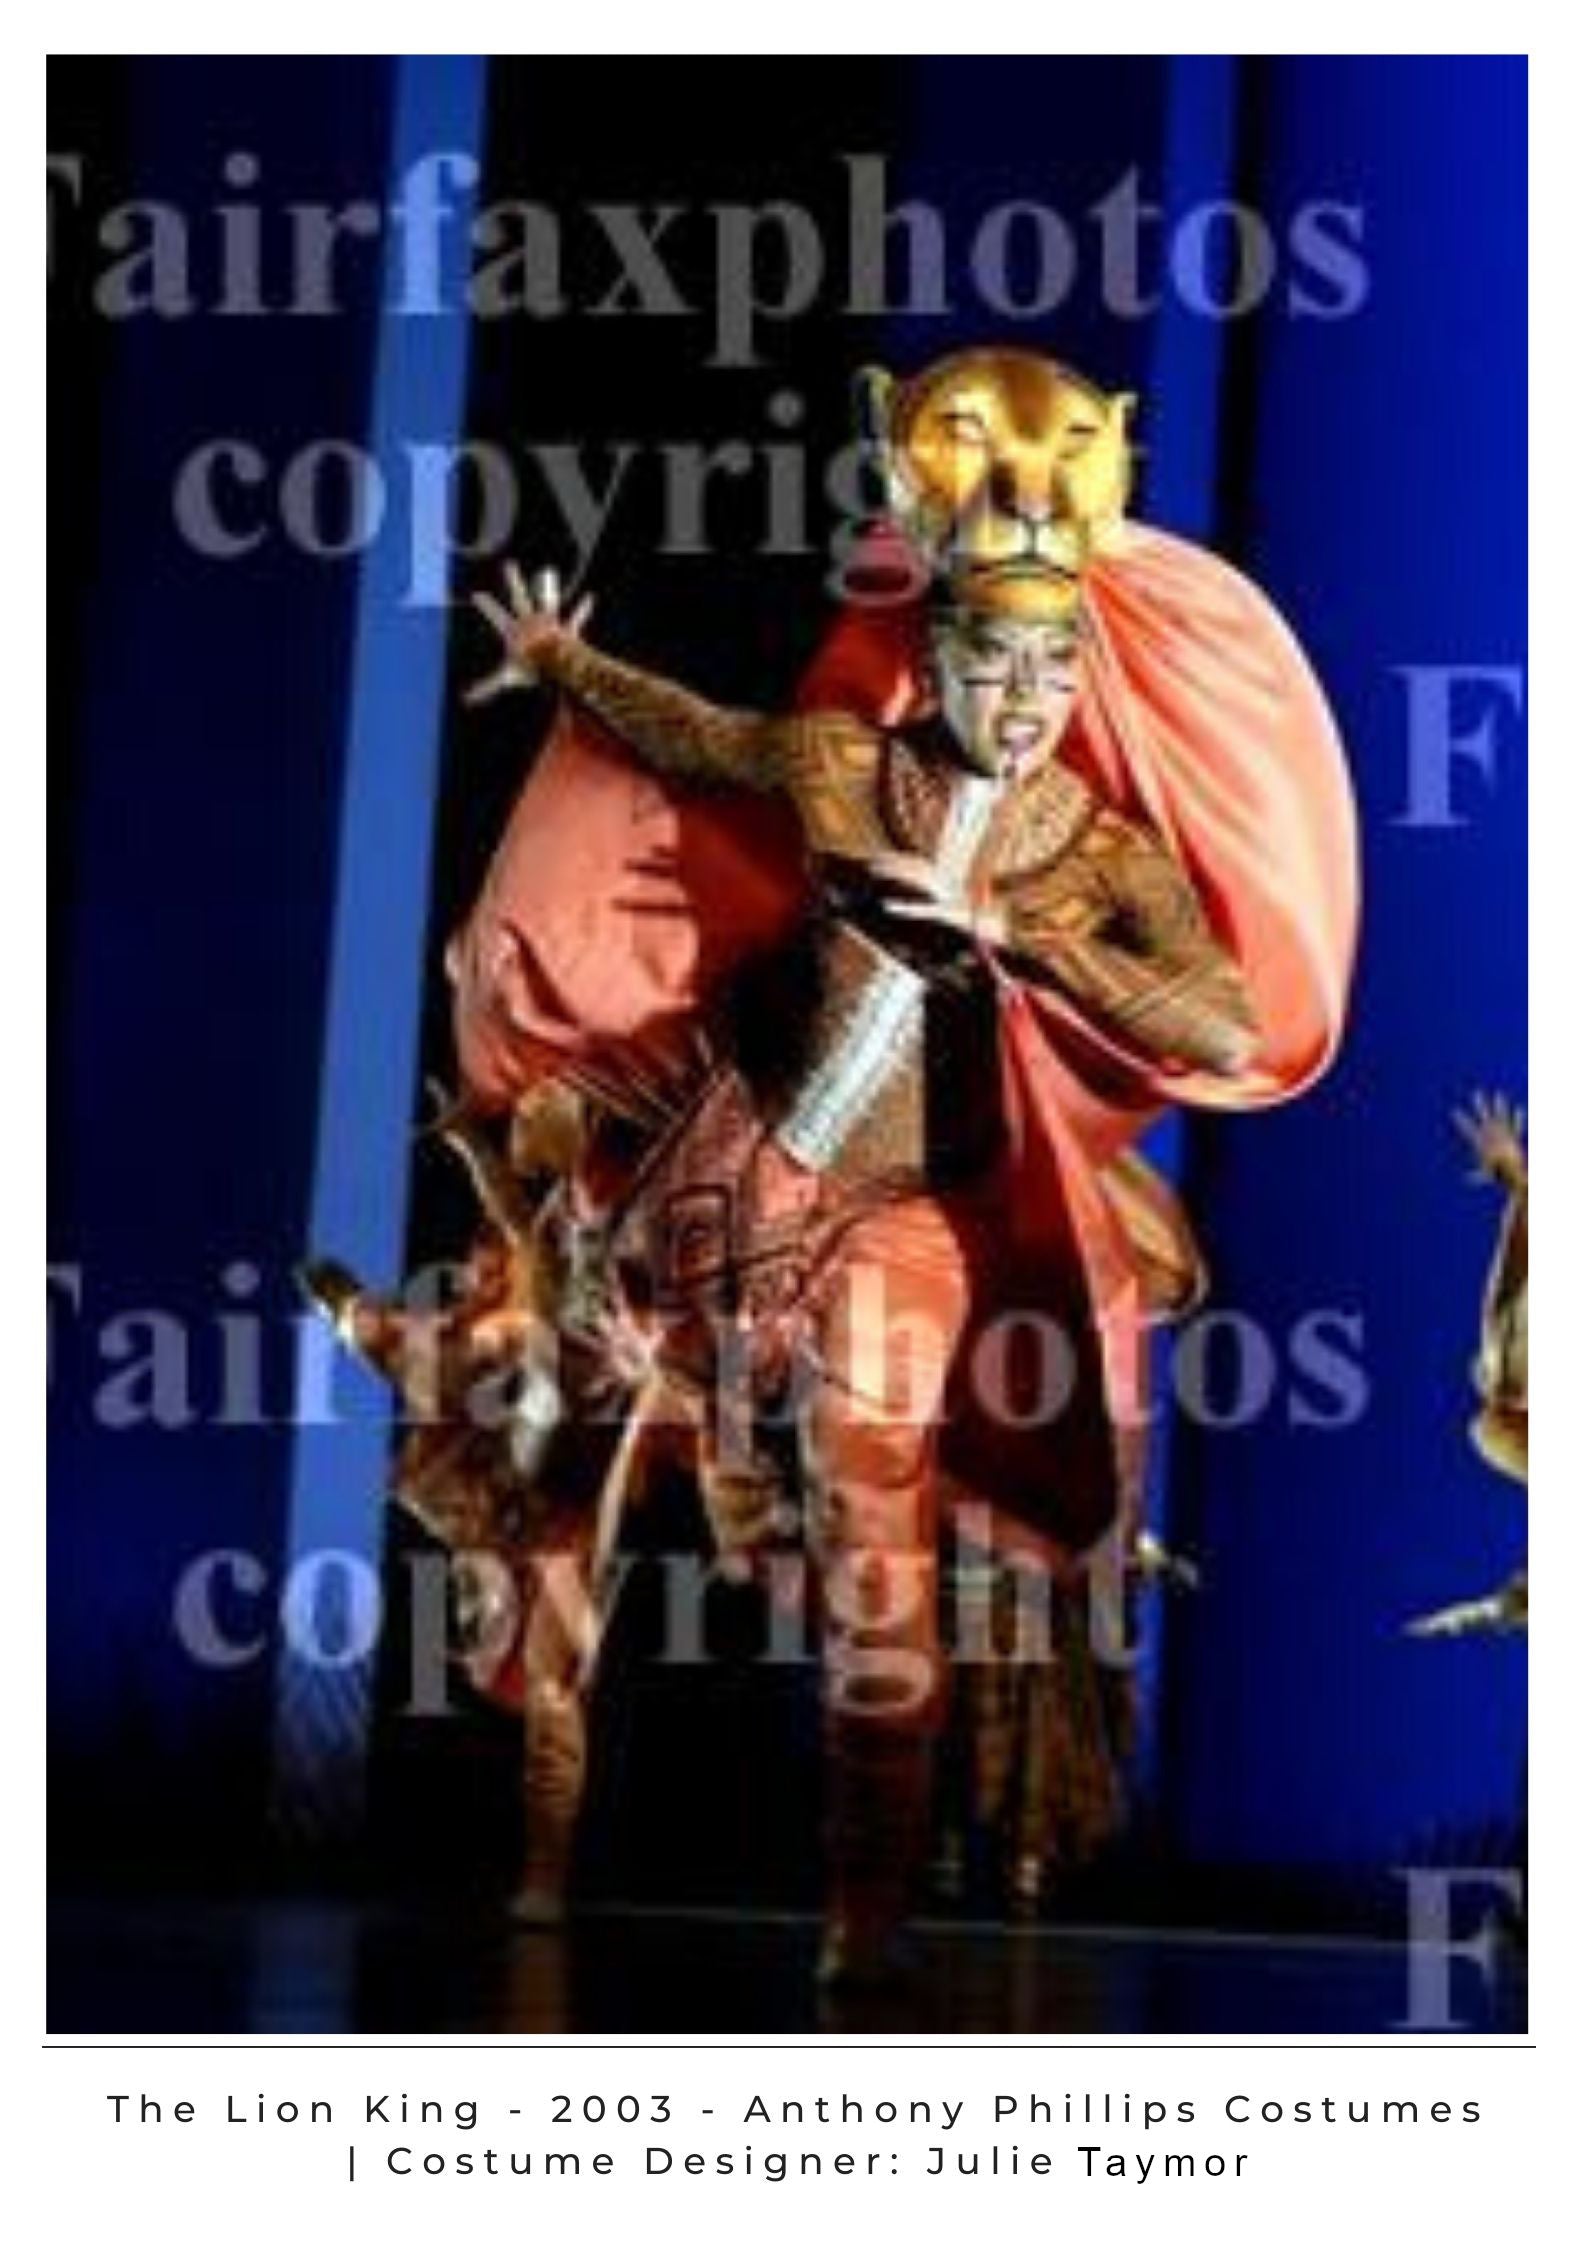 The Lion King Broadway Musical Entertainment Industry Theatre Movie Work Costume Construction Work Seamstress Draper